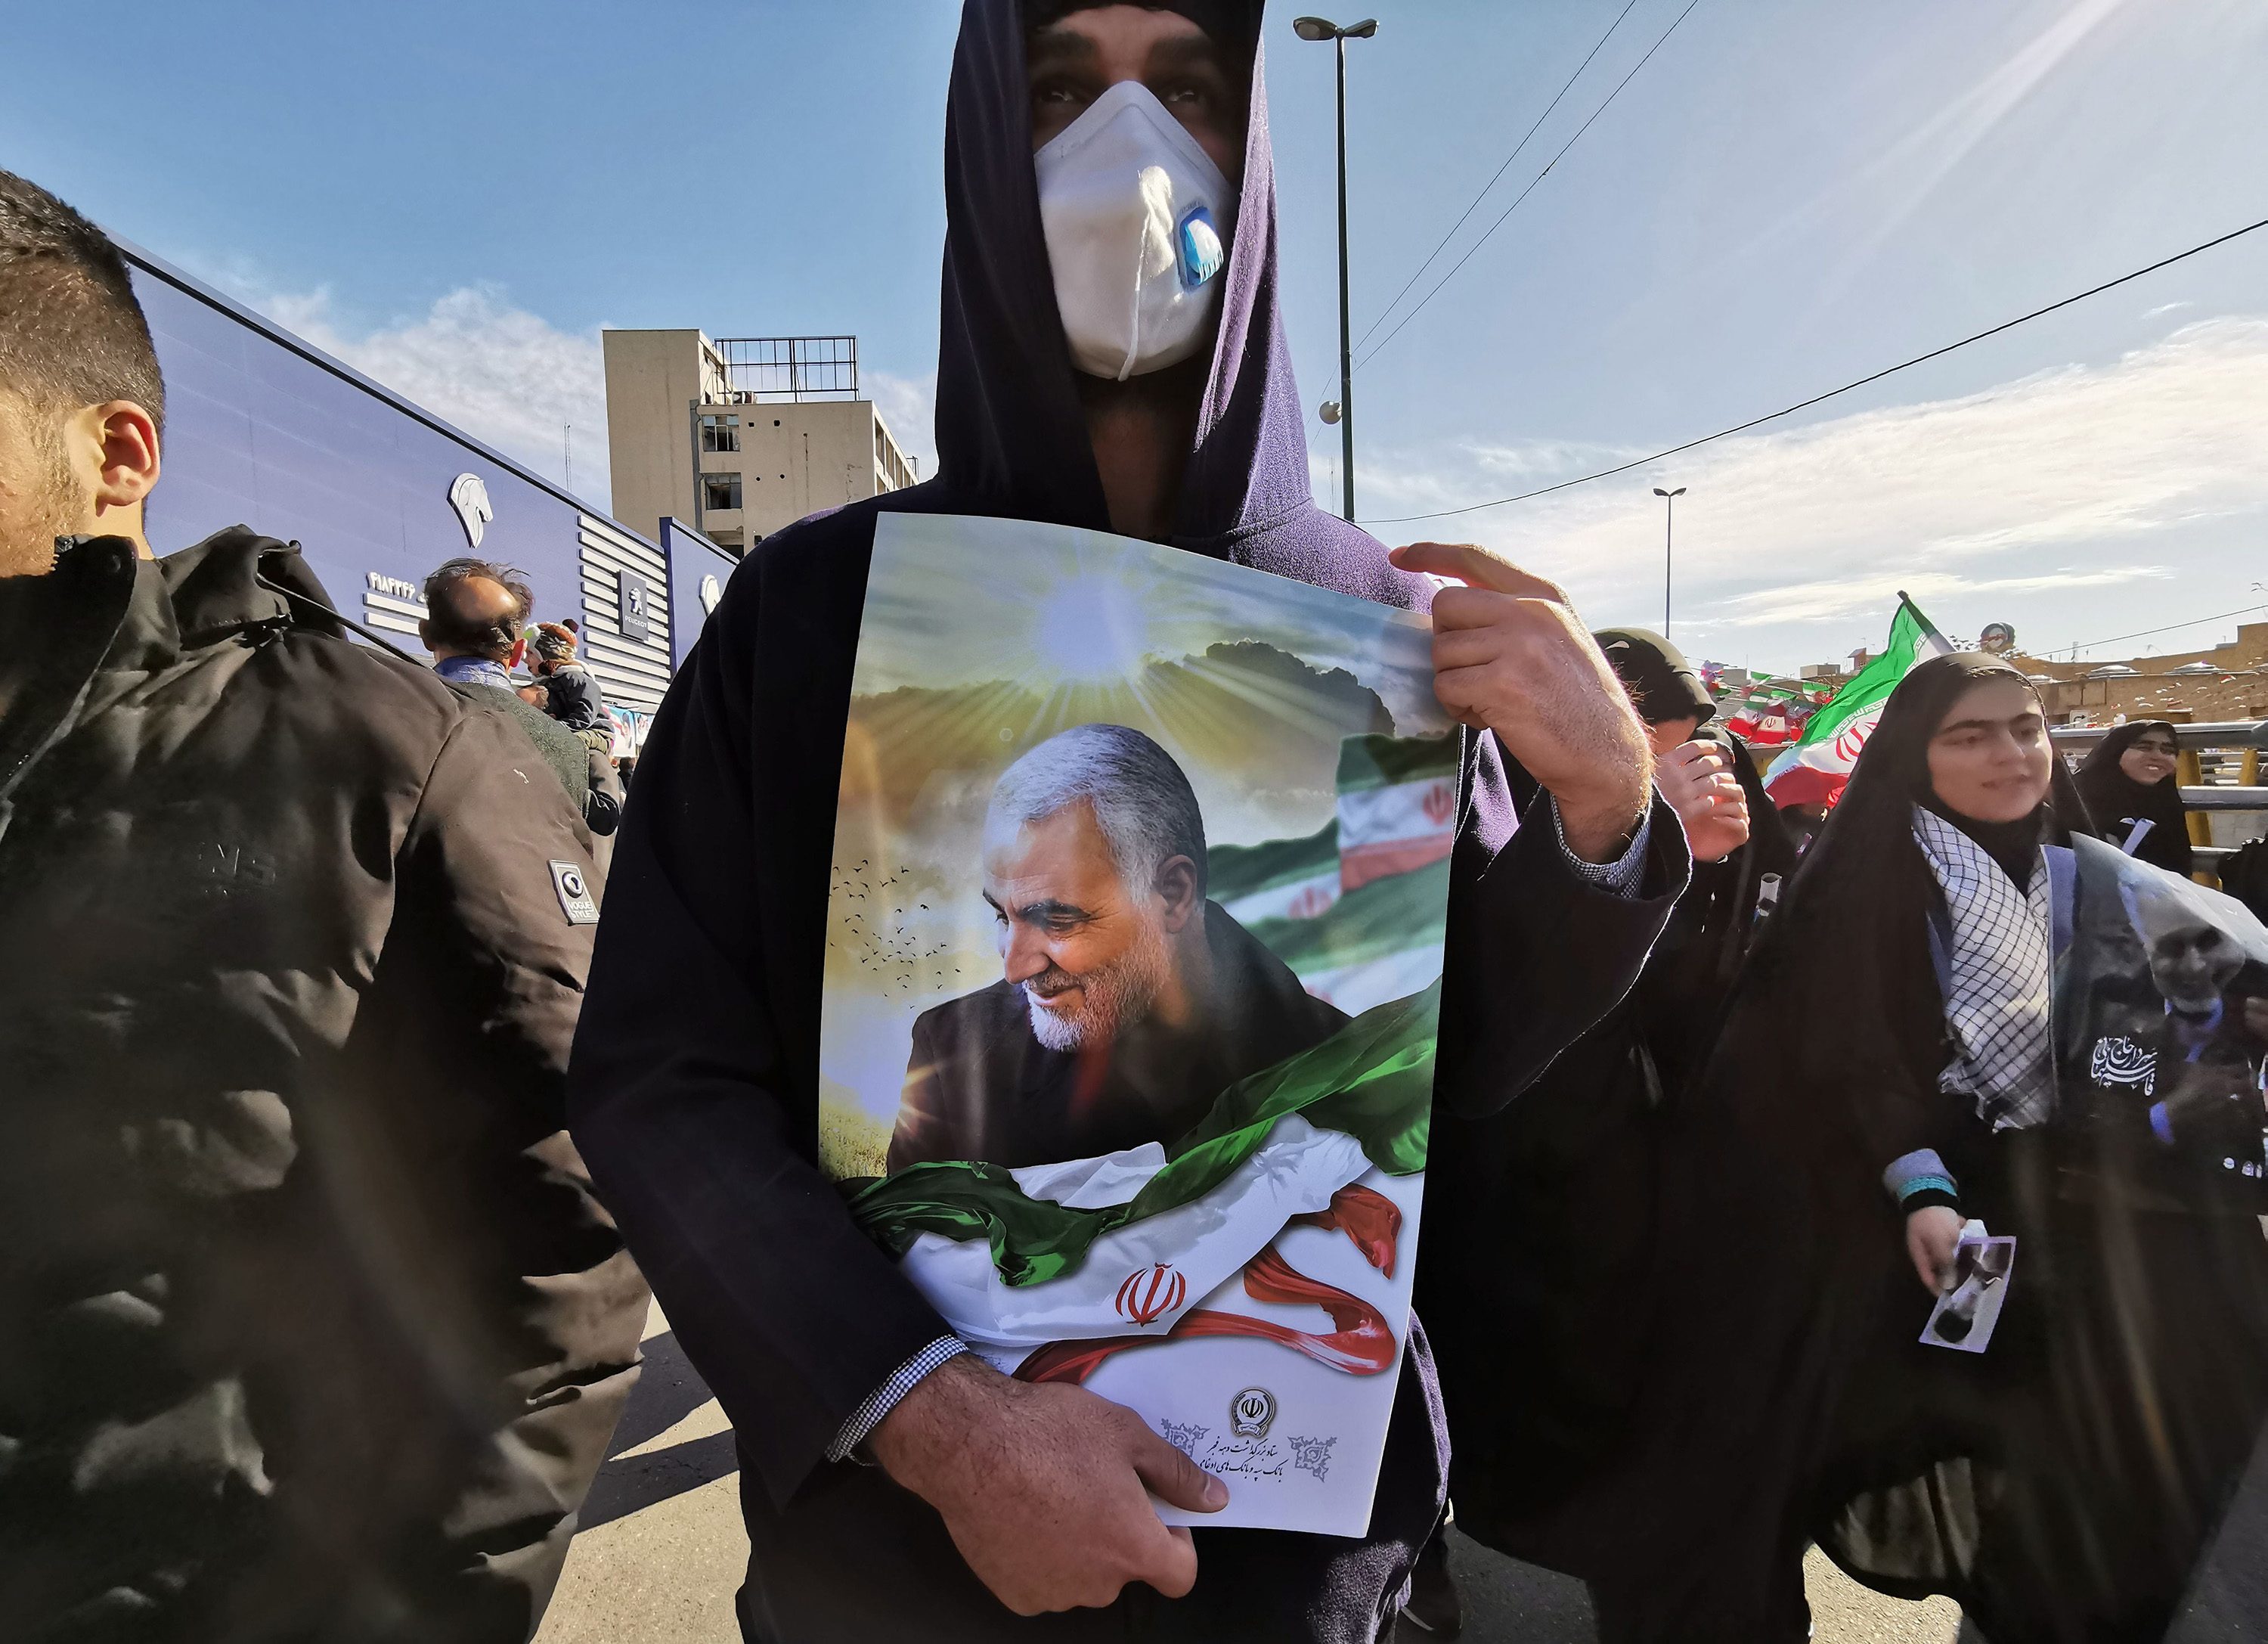 A man carries a portrait of General Qasem Soleimani during commemorations marking 41 years since the Islamic Revolution, in Tehran on Feb. 11.